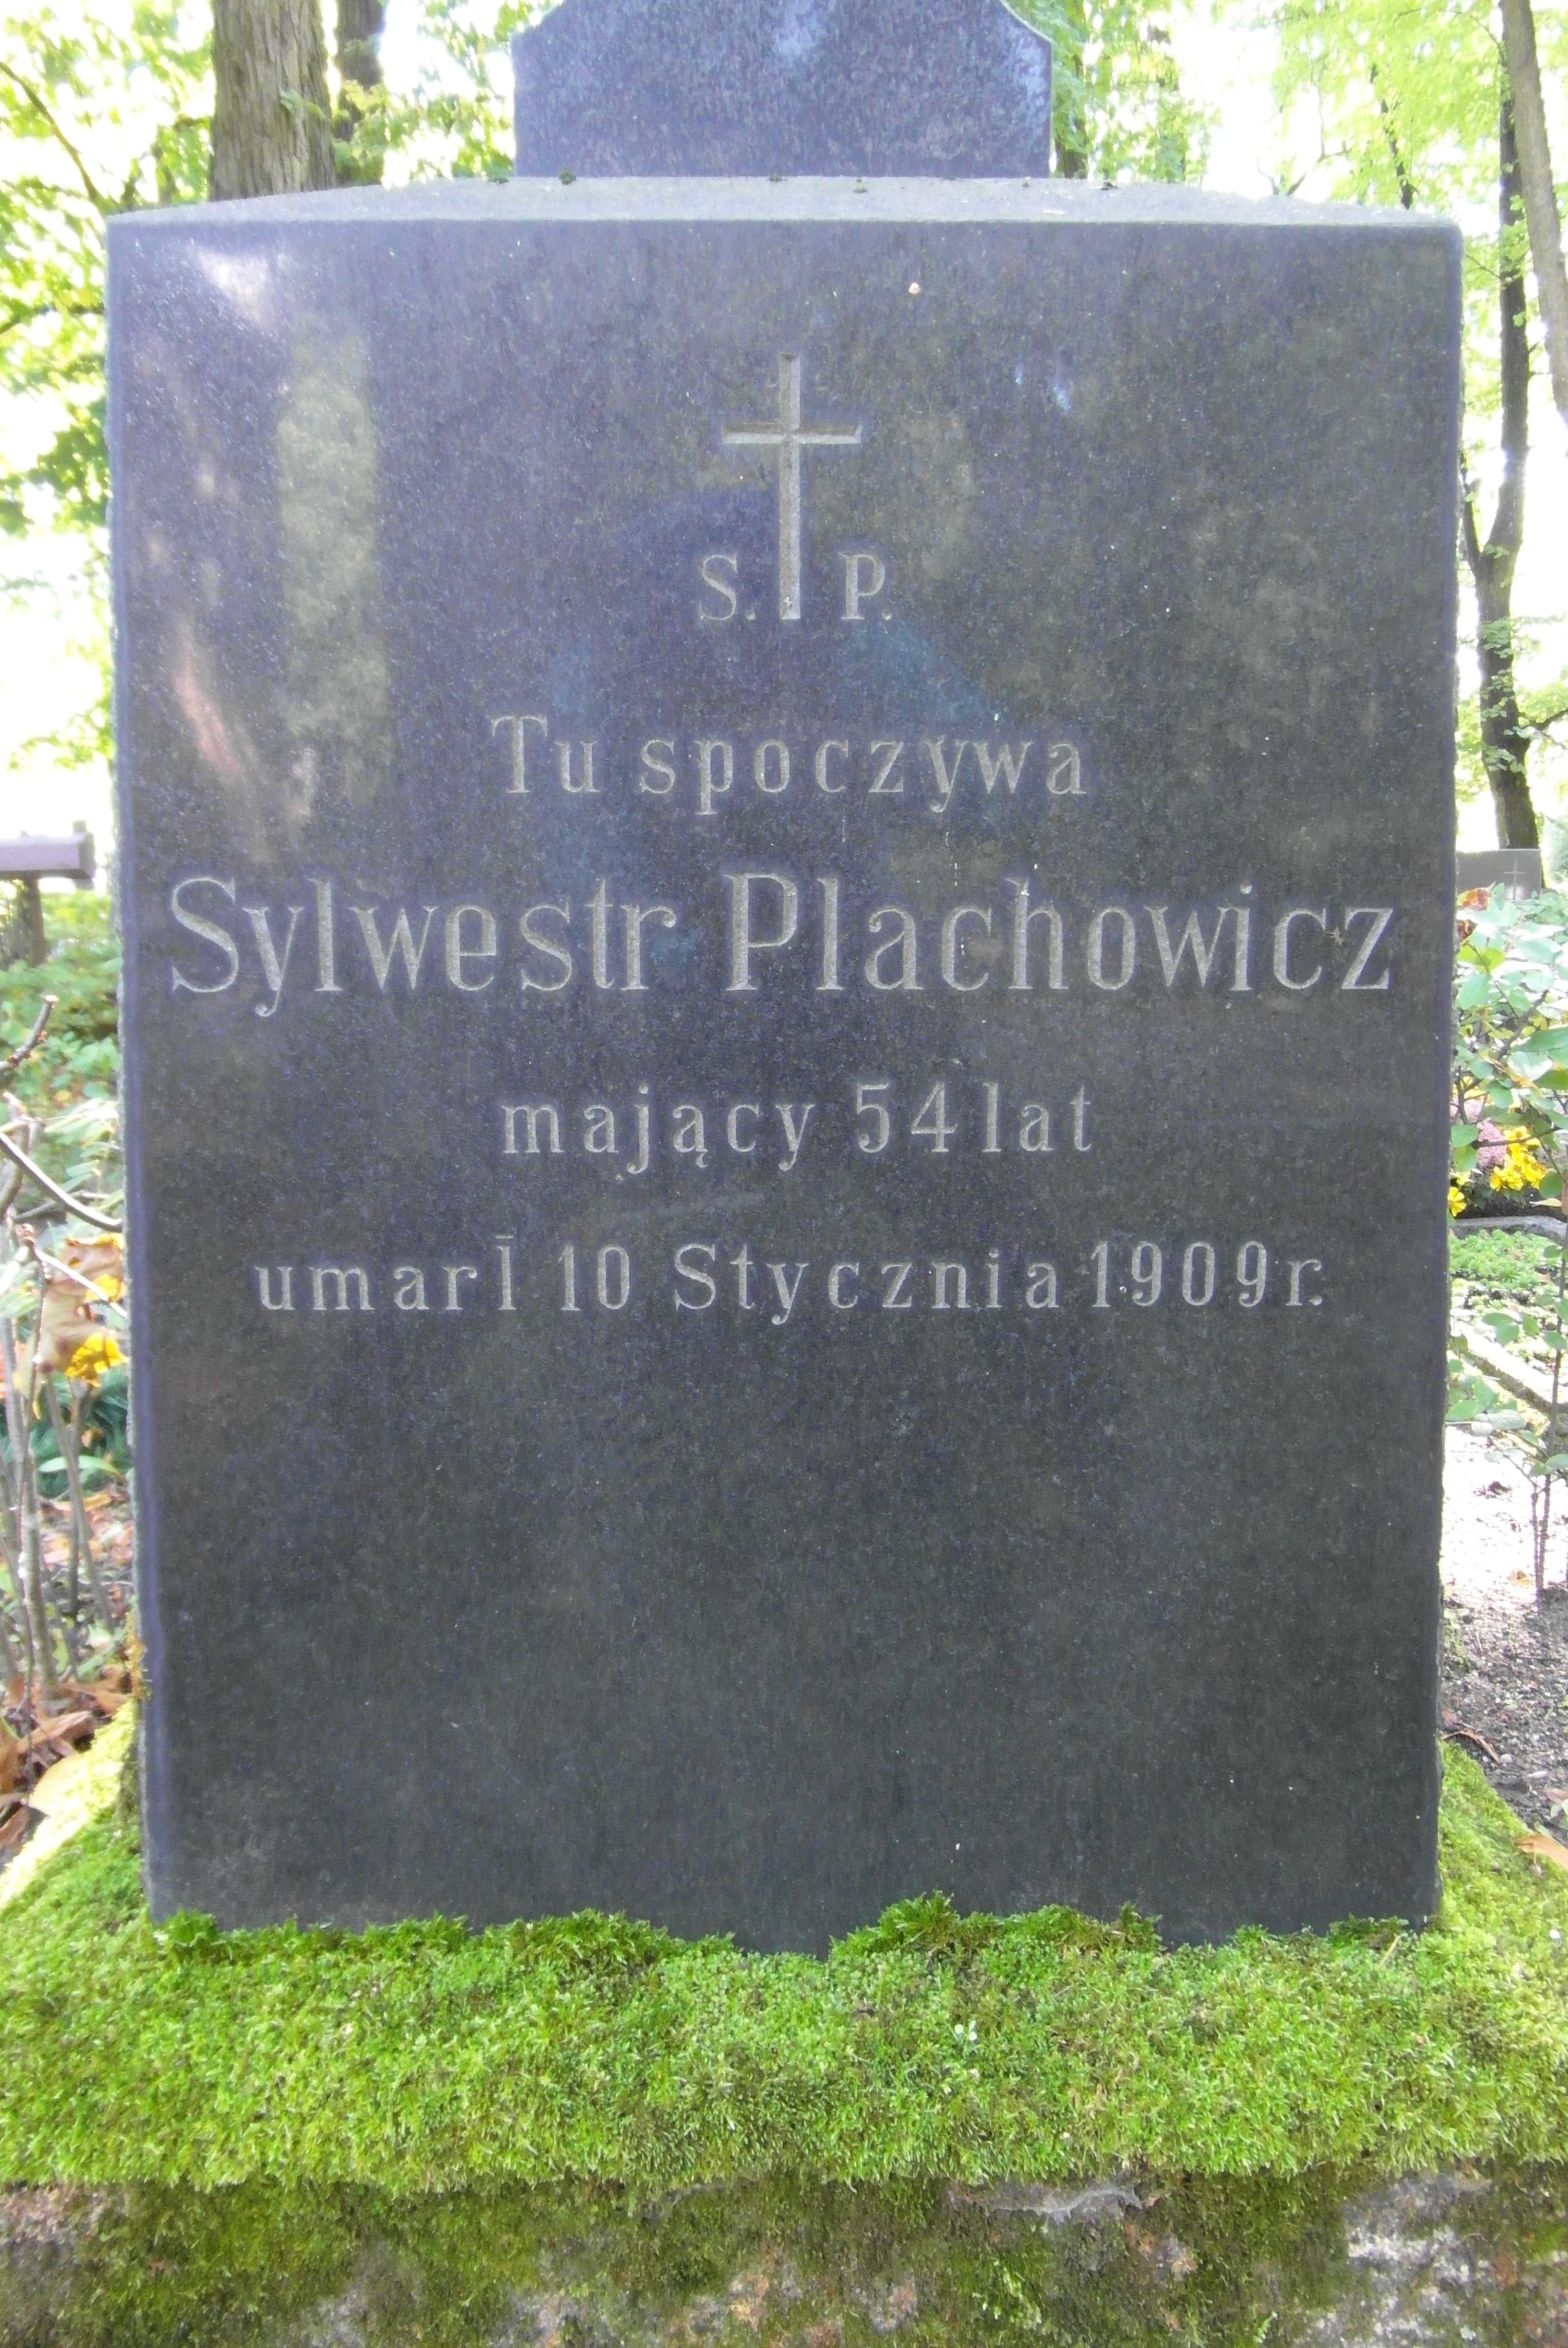 Inscription from the tombstone of Sylvester Plachowicz, St Michael's cemetery in Riga, as of 2021.